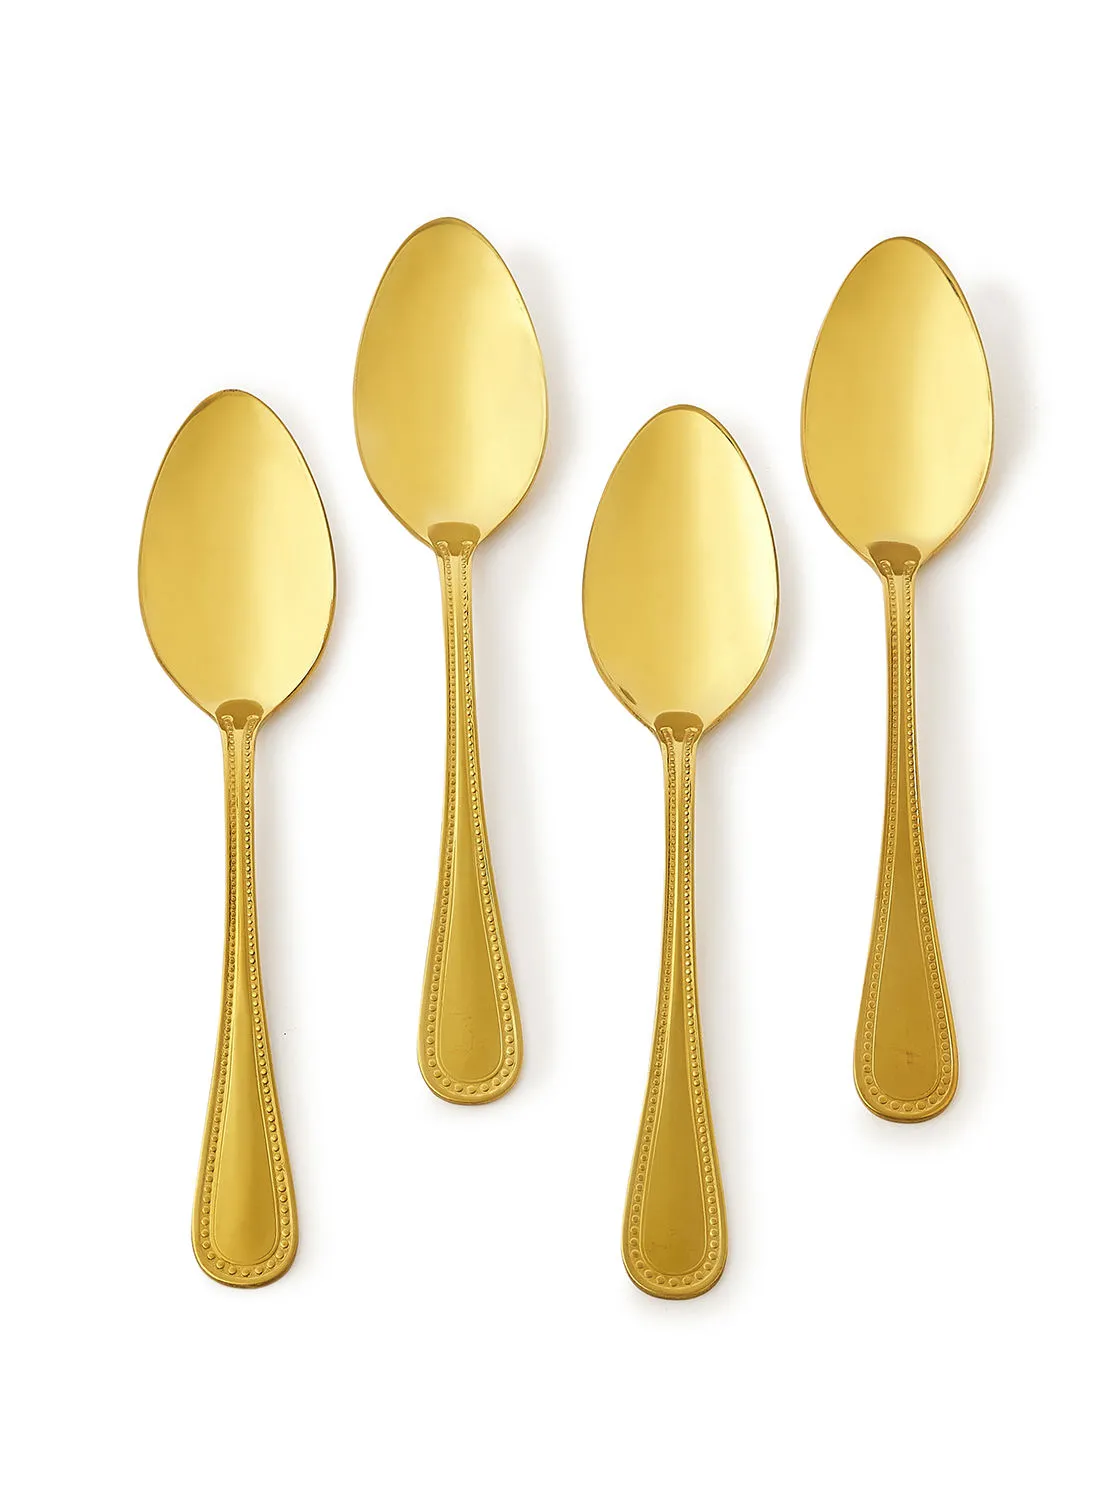 Amal 4 Piece Tablespoons Set - Made Of Stainless Steel - Silverware Flatware - Spoons - Spoon Set - Table Spoons - Serves 4 - Design Gold Mallow